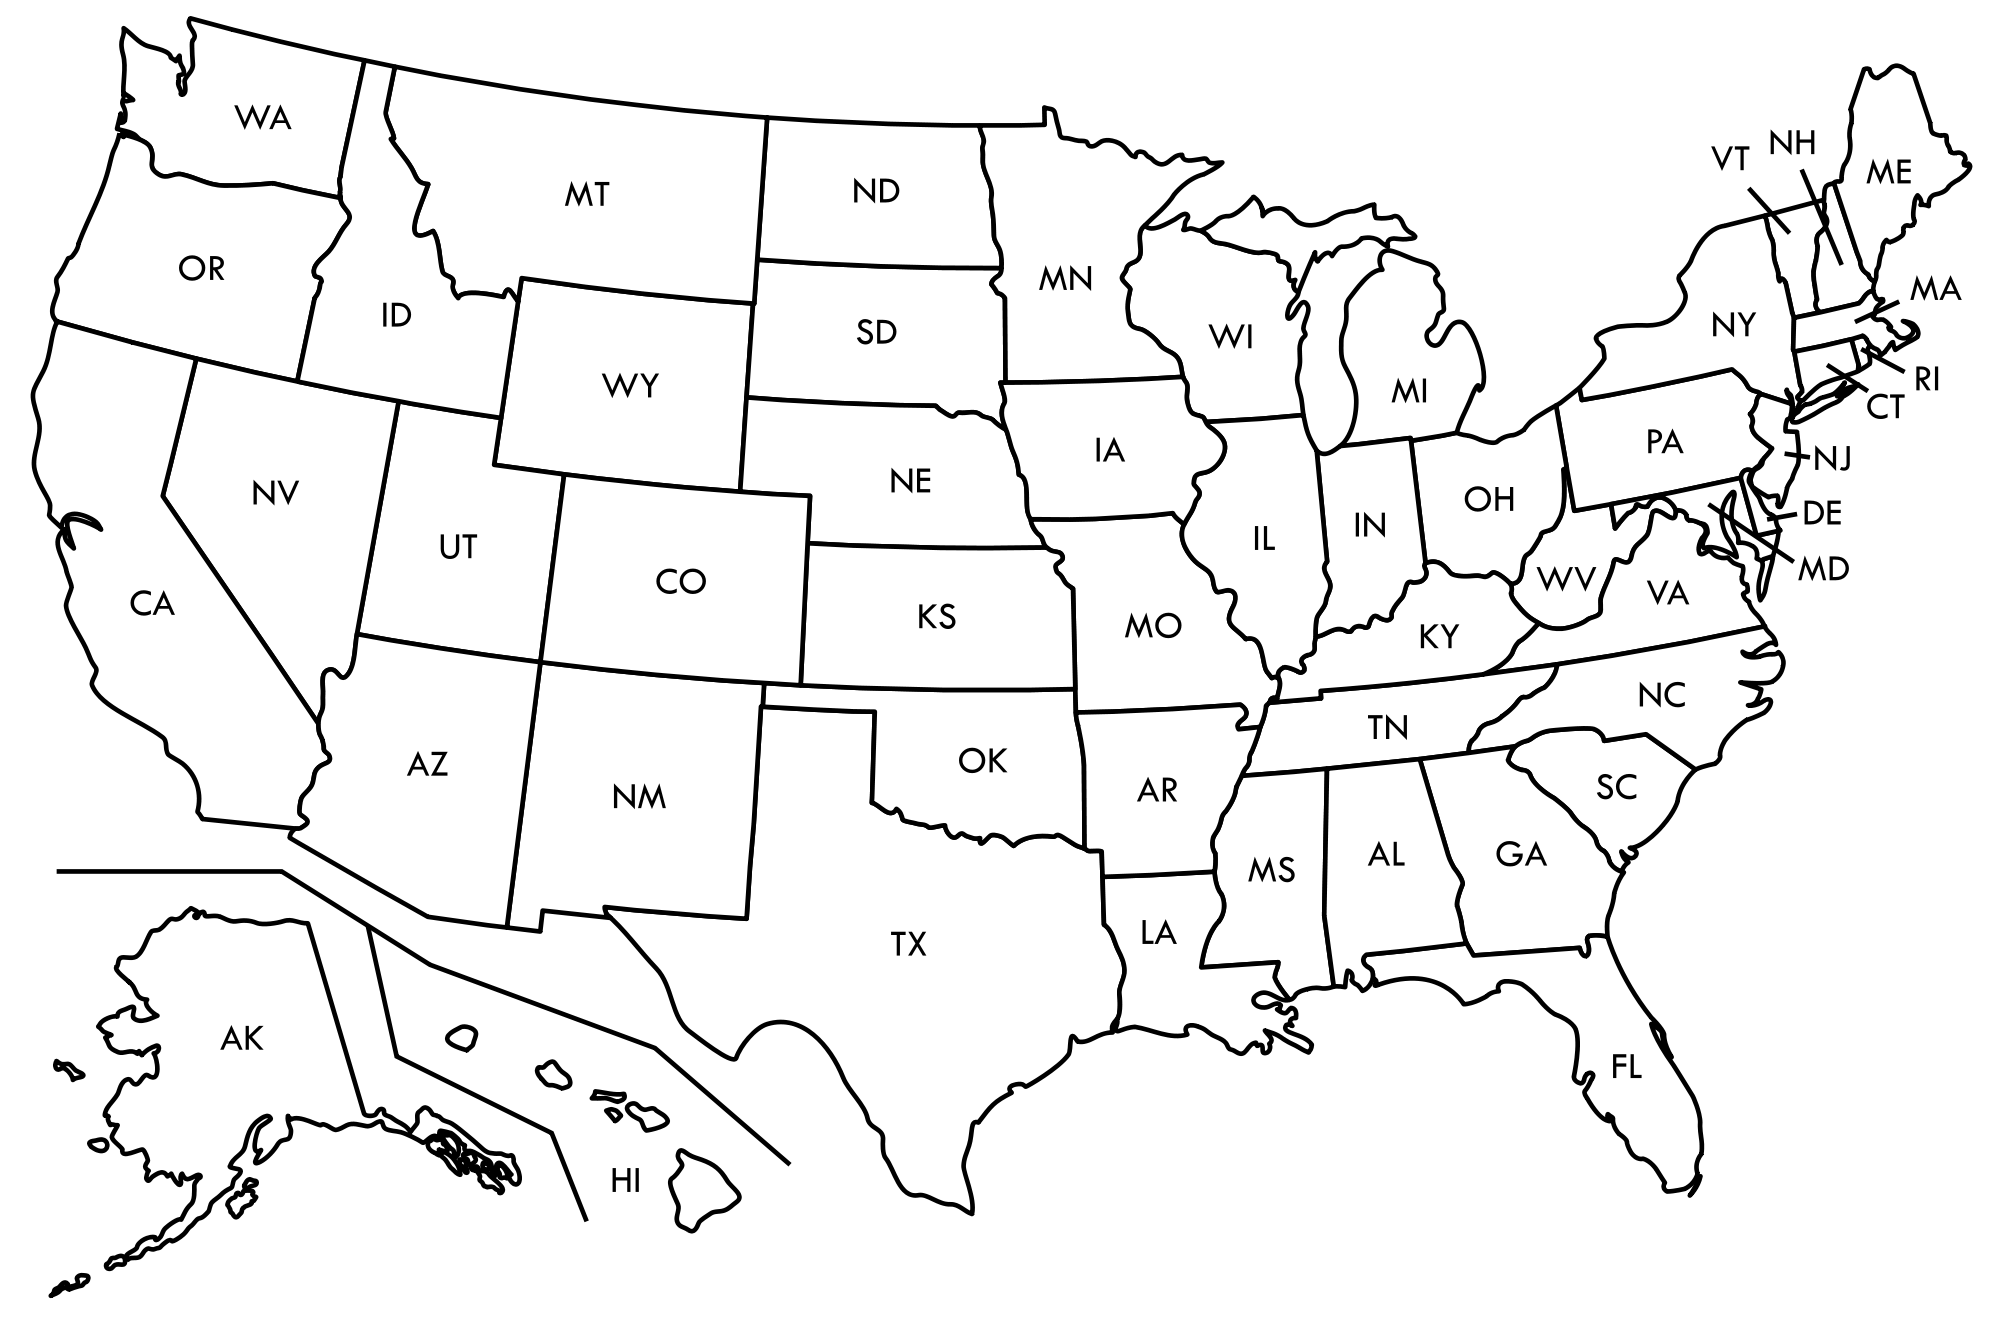 Maps clipart map usa, Maps map usa Transparent FREE for.